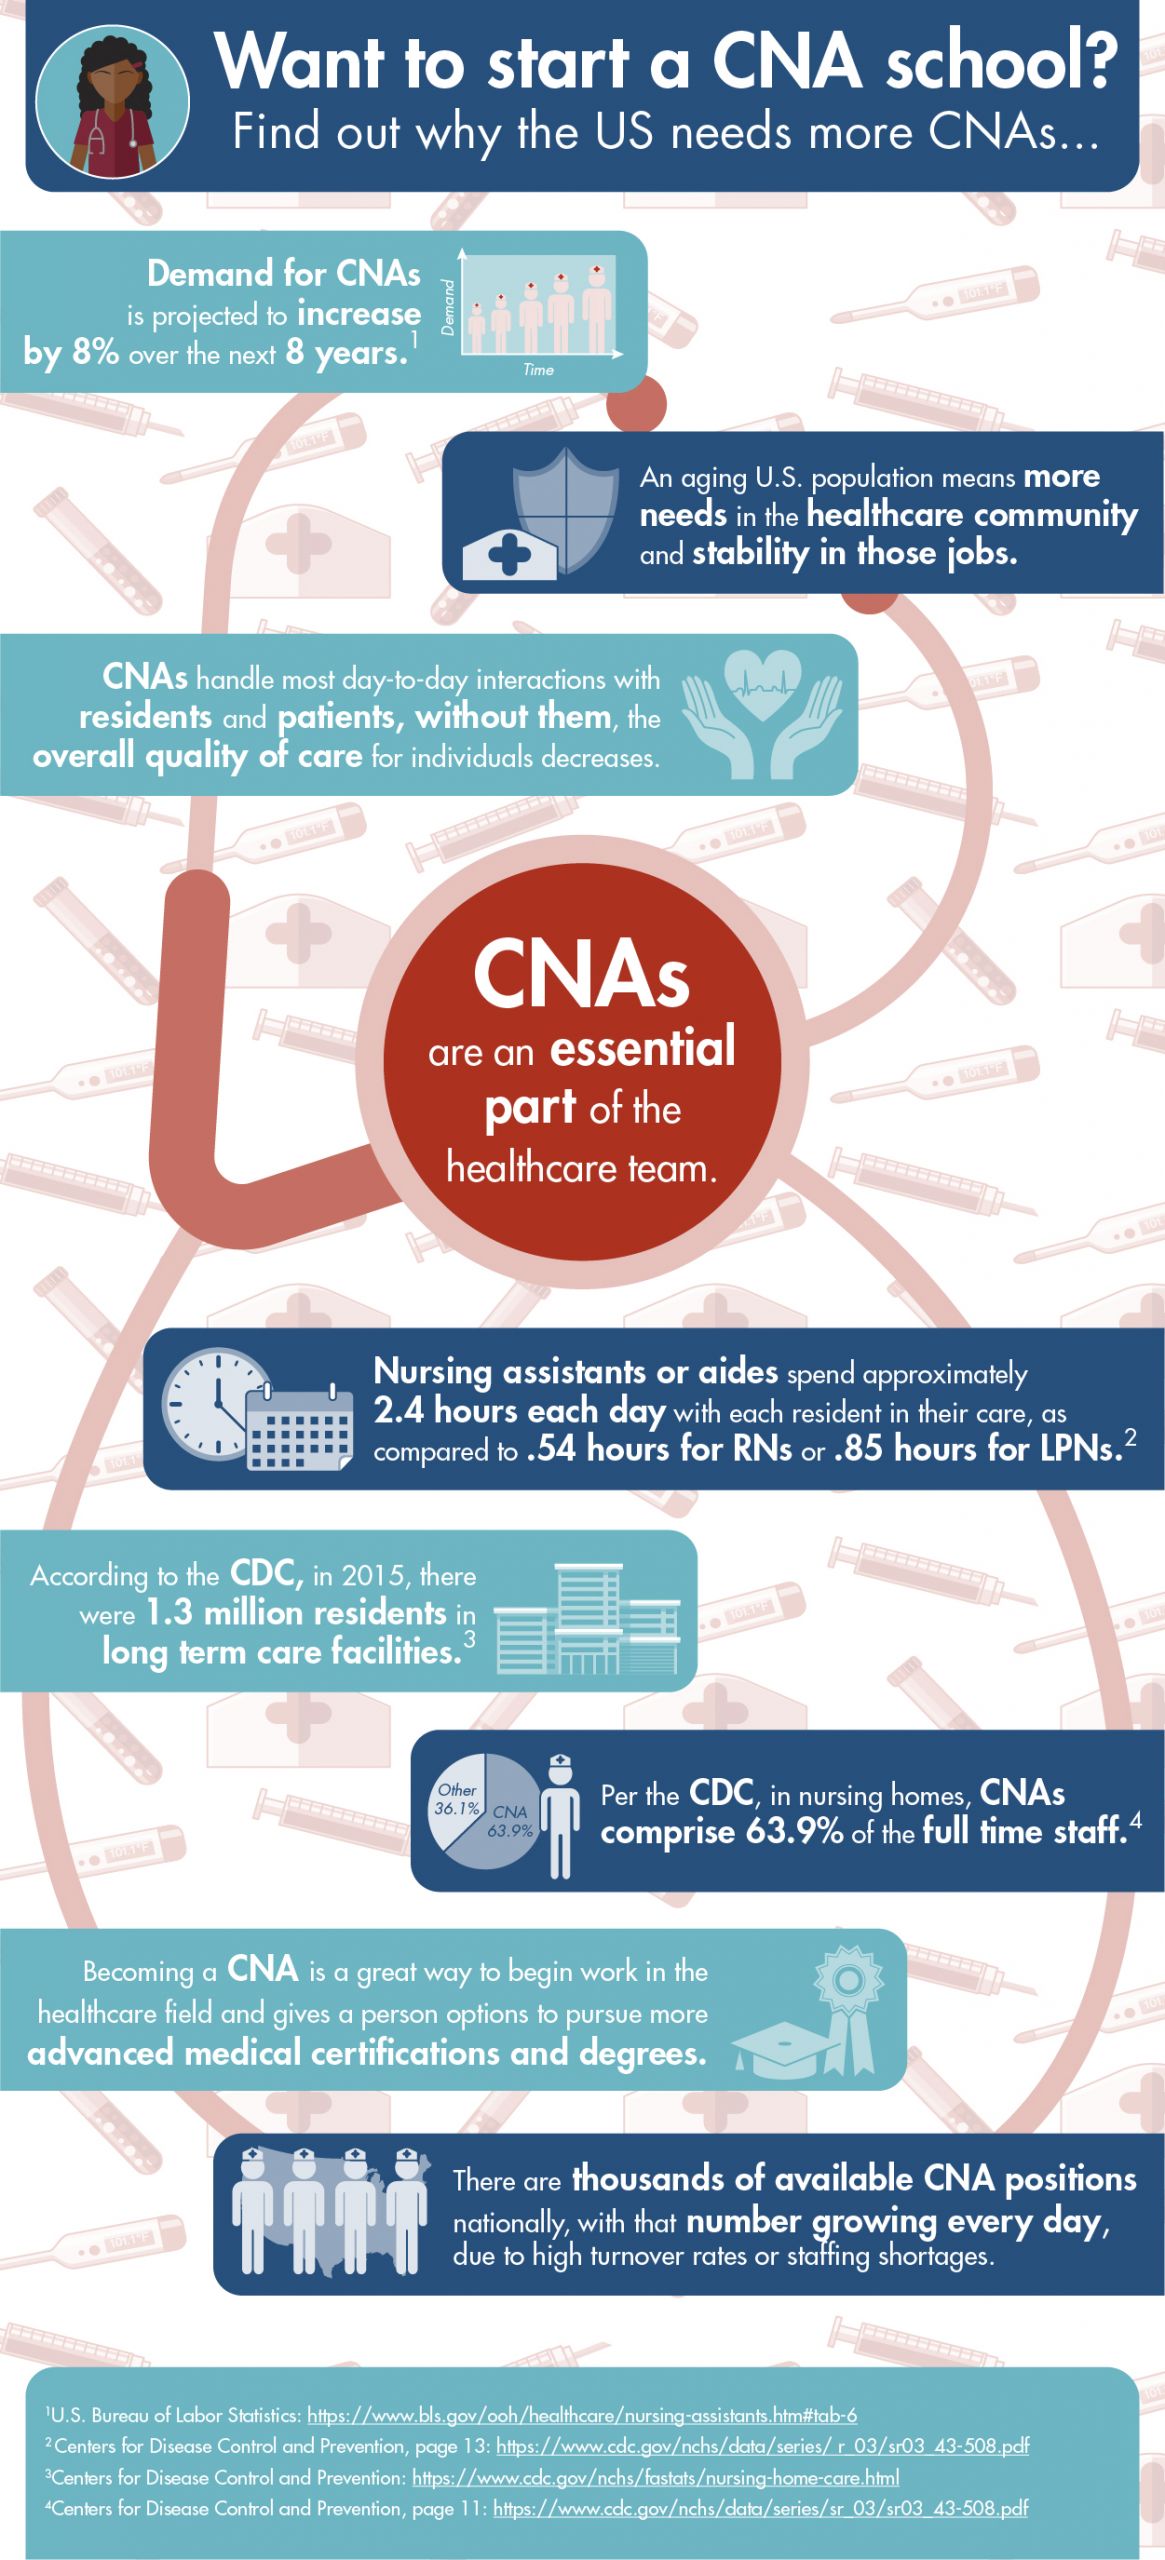 Why the US needs more CNAs infographic